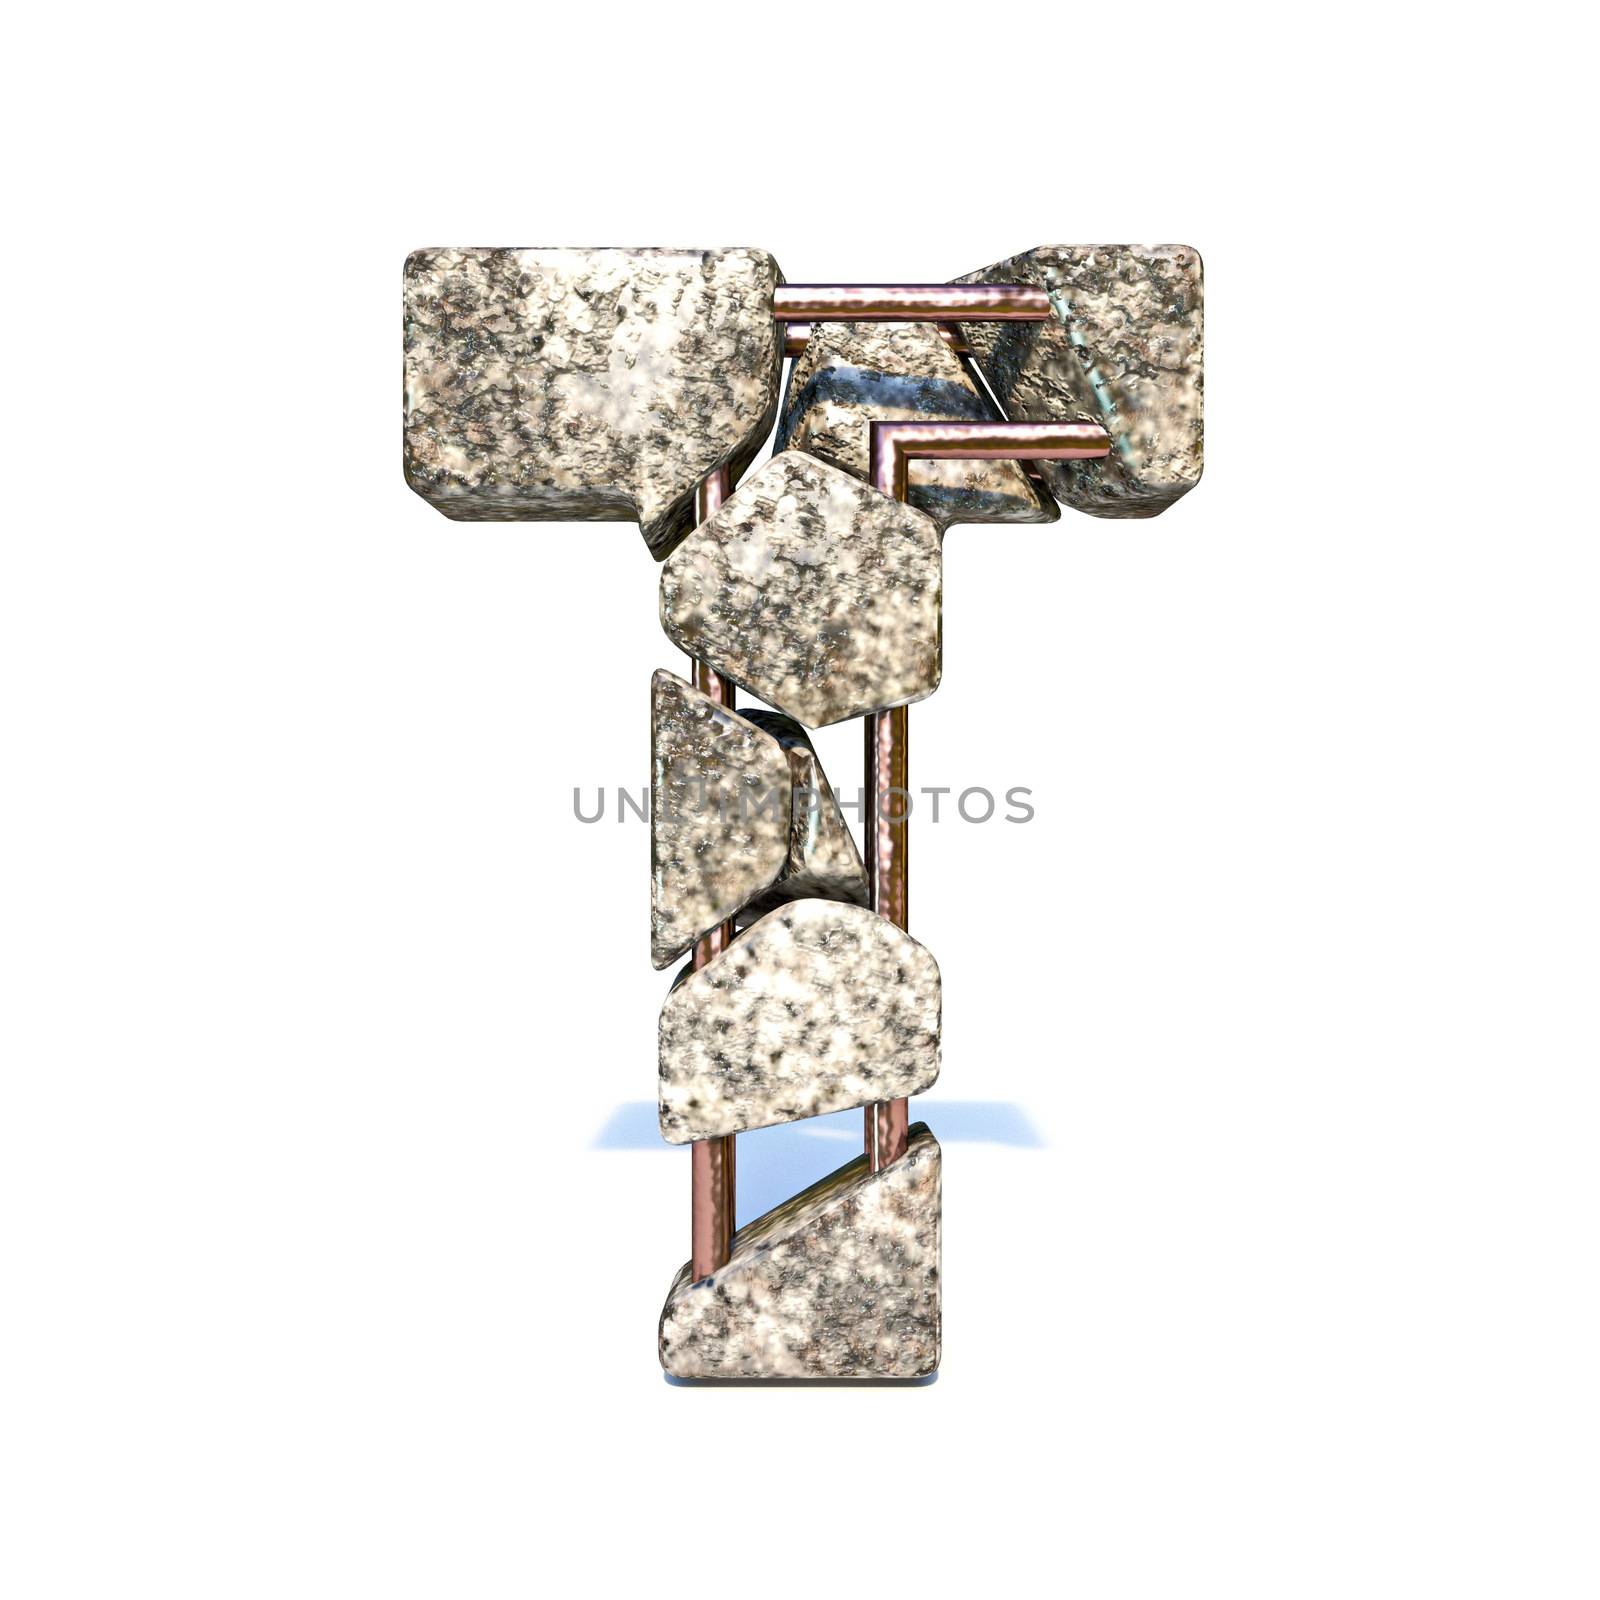 Concrete fracture font Letter T 3D render illustration isolated on white background